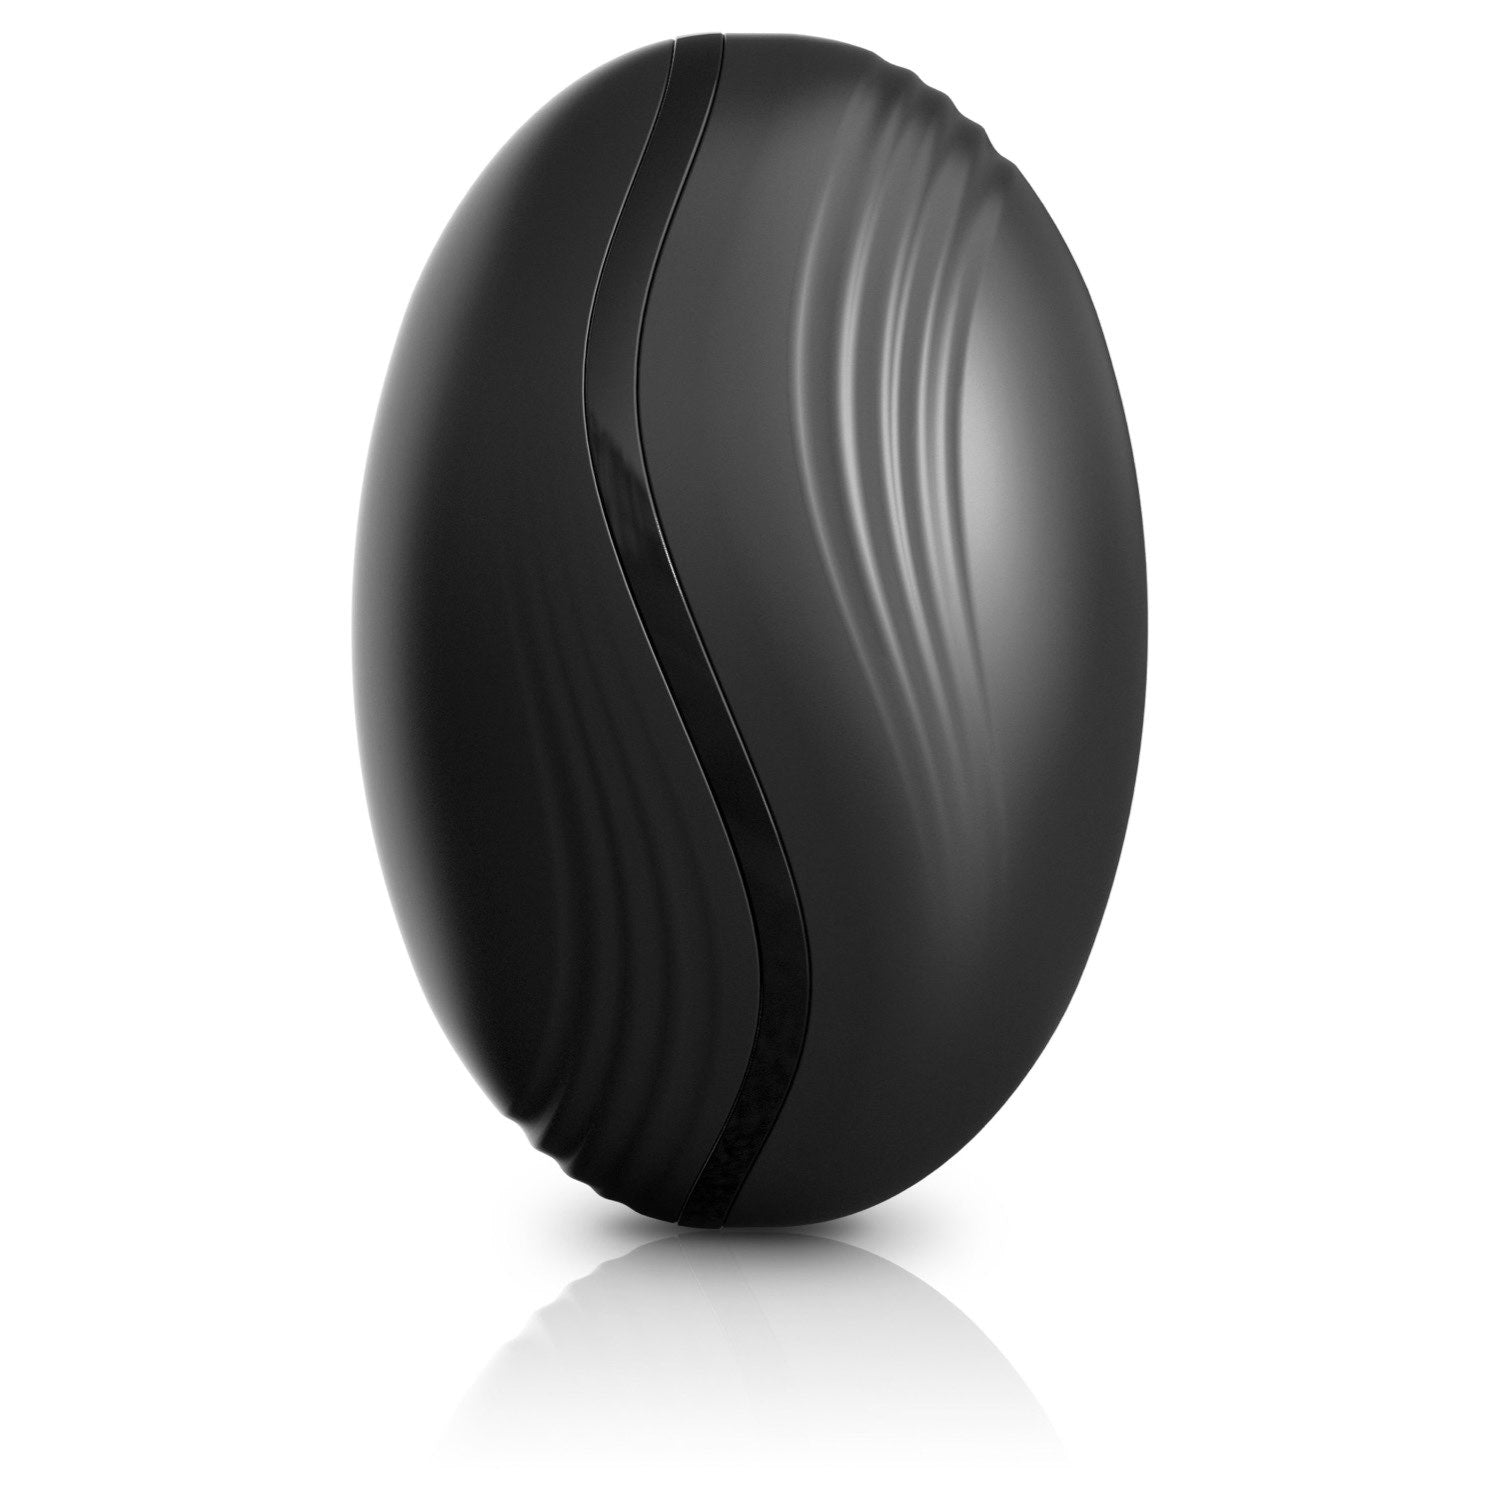 Sir Richards Control Silicone Rim Joy - Black USB Rechargeable Anal Stimulator by Pipedream